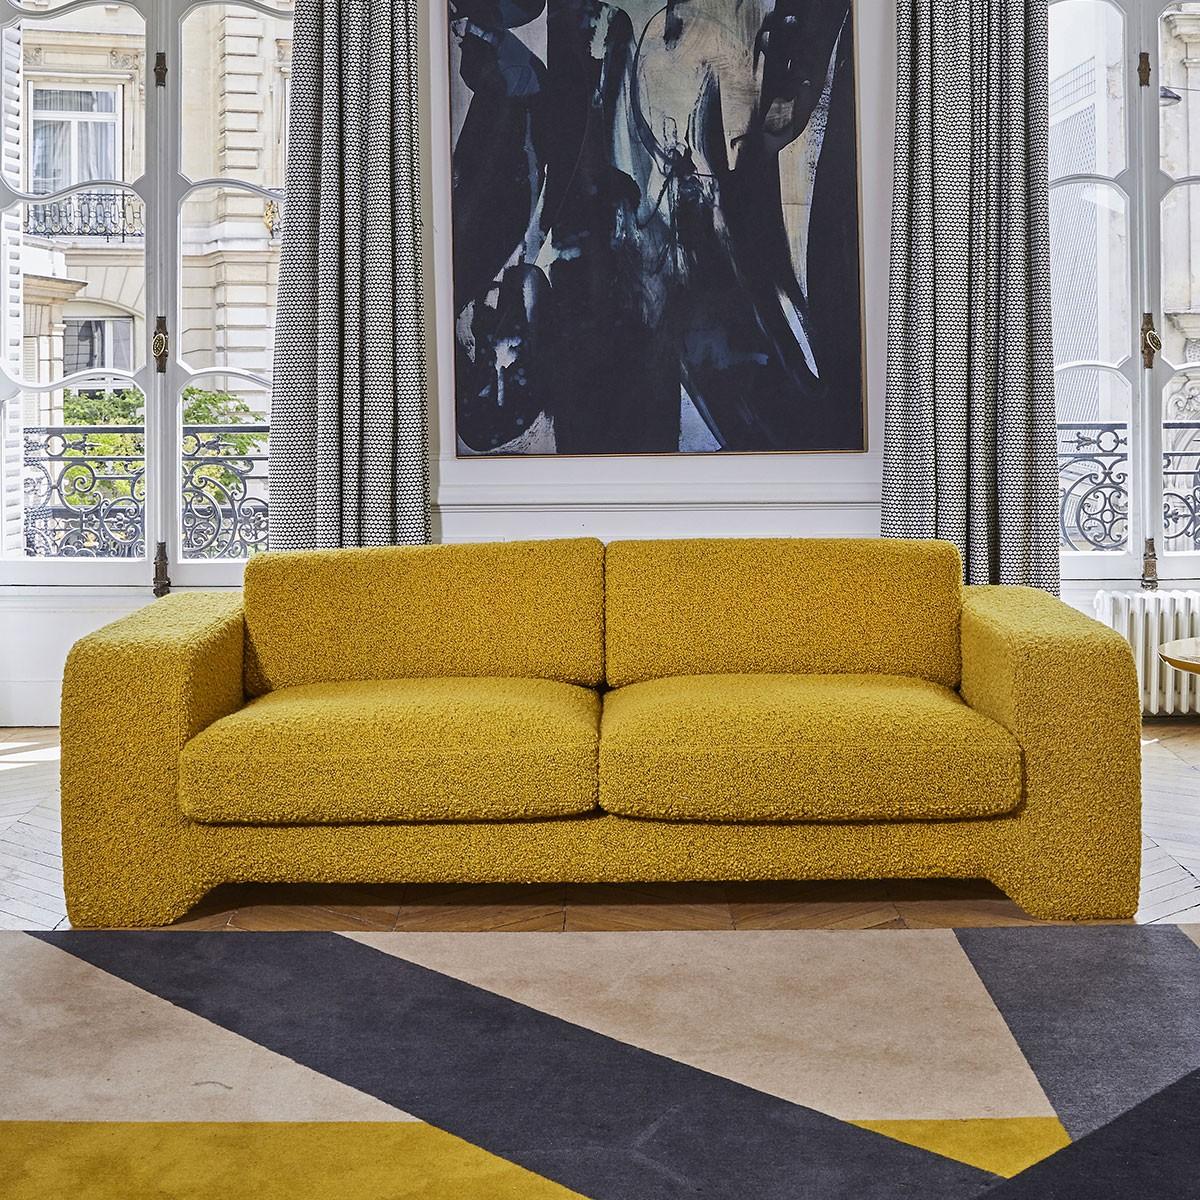 Popus editions Giovanna 4 seater sofa in yellow verone velvet upholstery.

Giovanna is a sofa with a strong profile. A sober, plush line, with this famous detail that changes everything, so as not to forget its strength of character and this